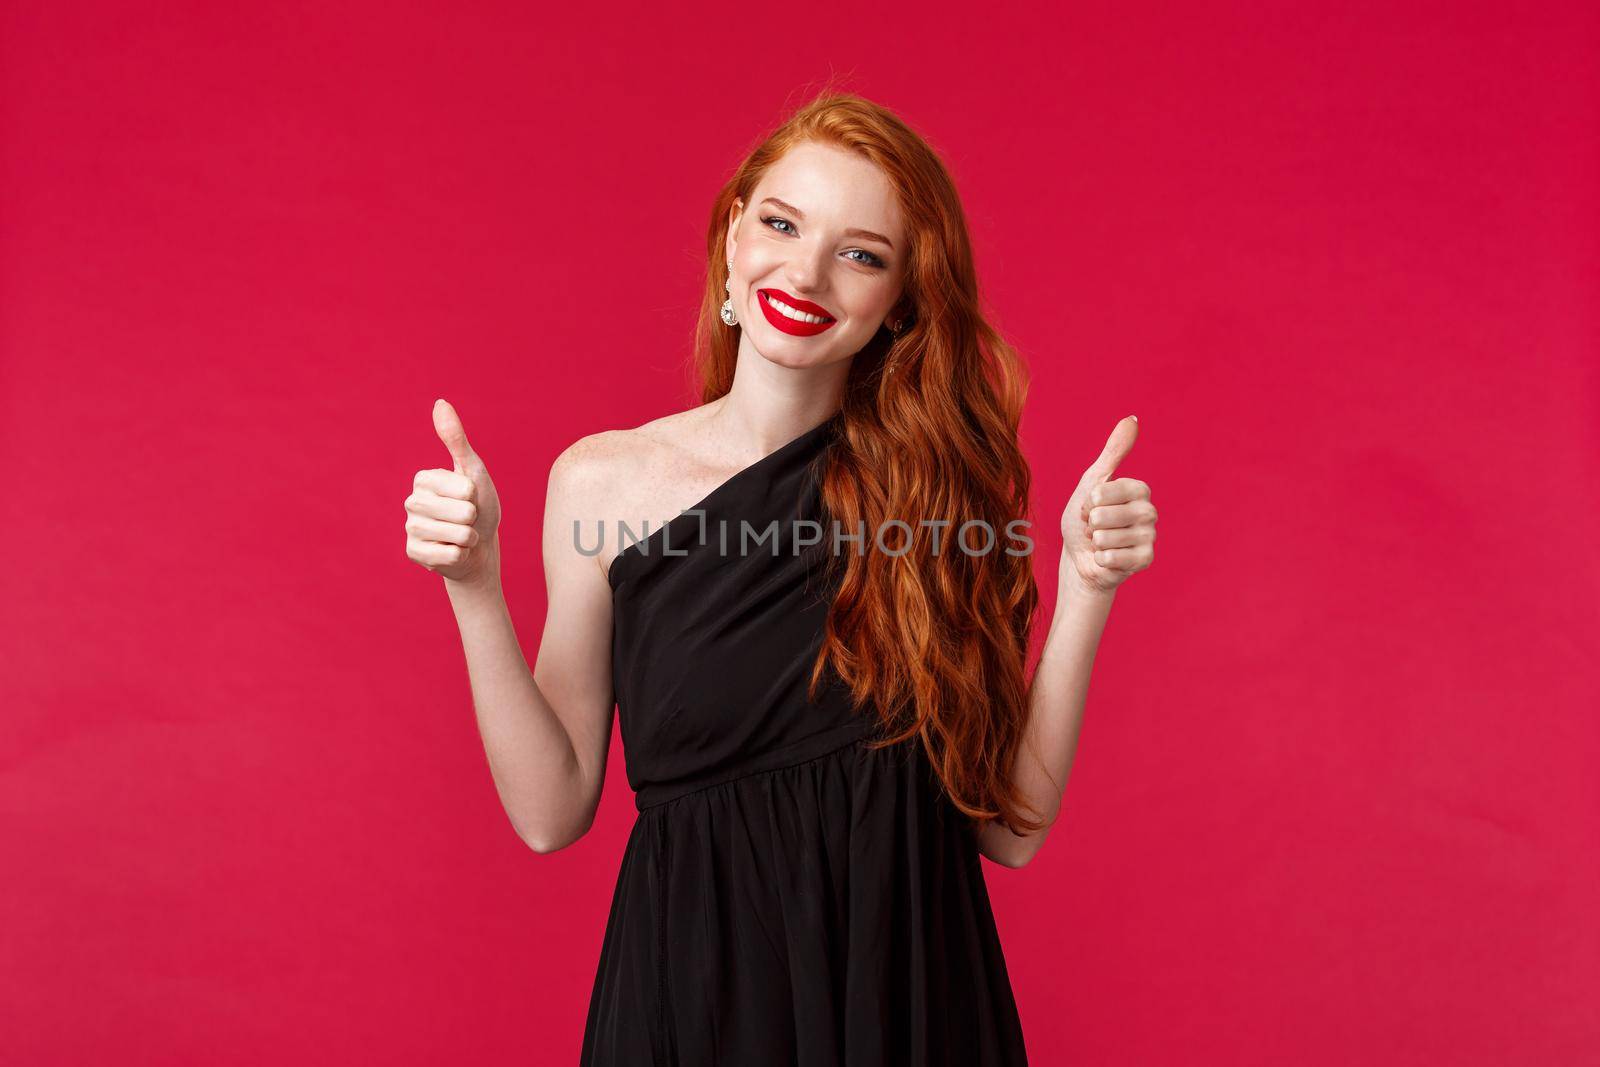 Fashion, luxury and beauty concept. Portrait of charming supportive young redhead woman in black elegant dress, makeup, smiling pleased show thumbs-up in approval or like, red background.